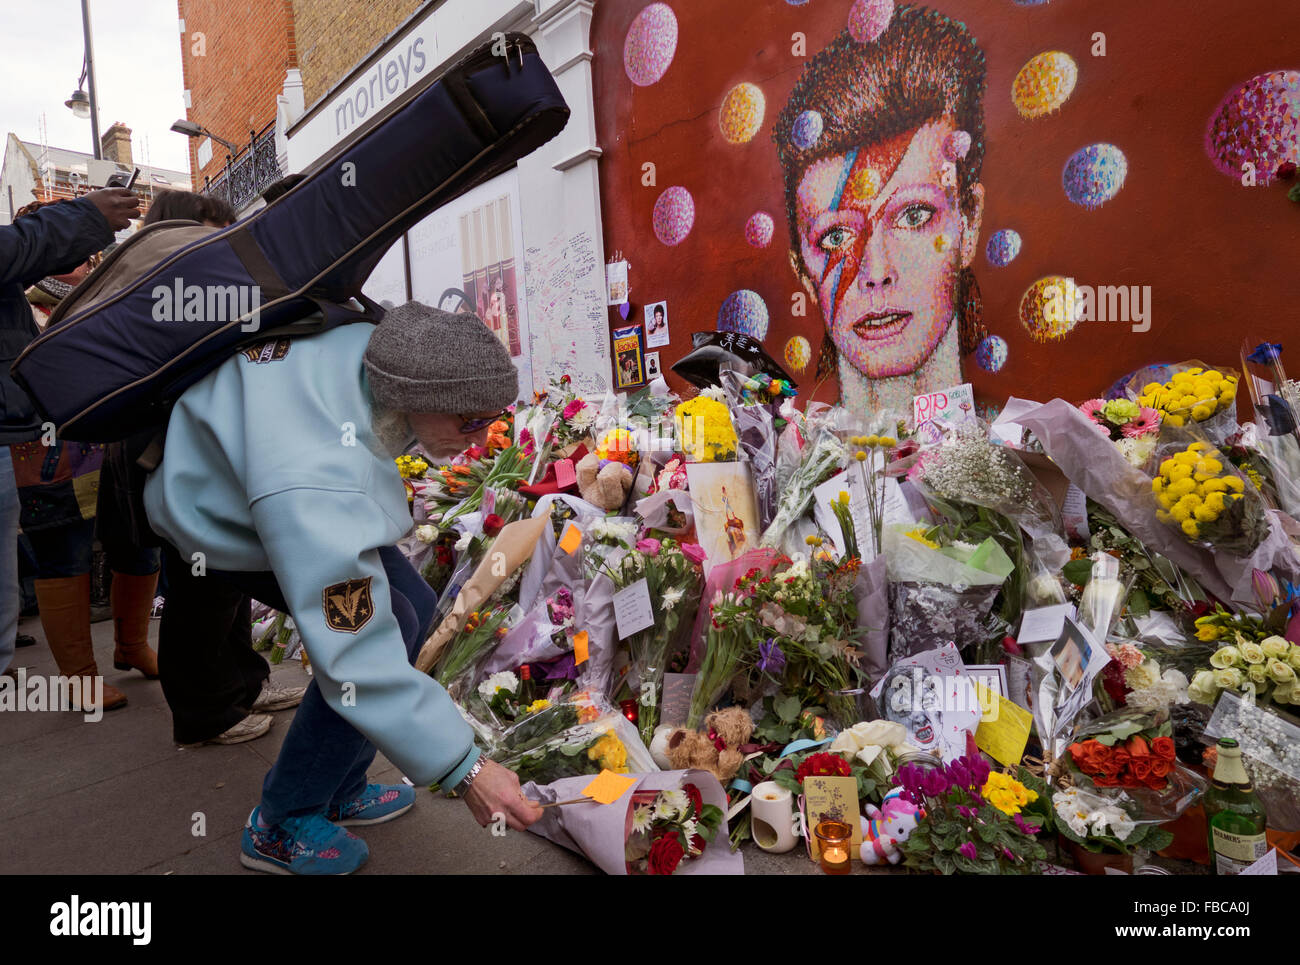 David Bowie memorial next to his mural in Brixton South London Stock Photo